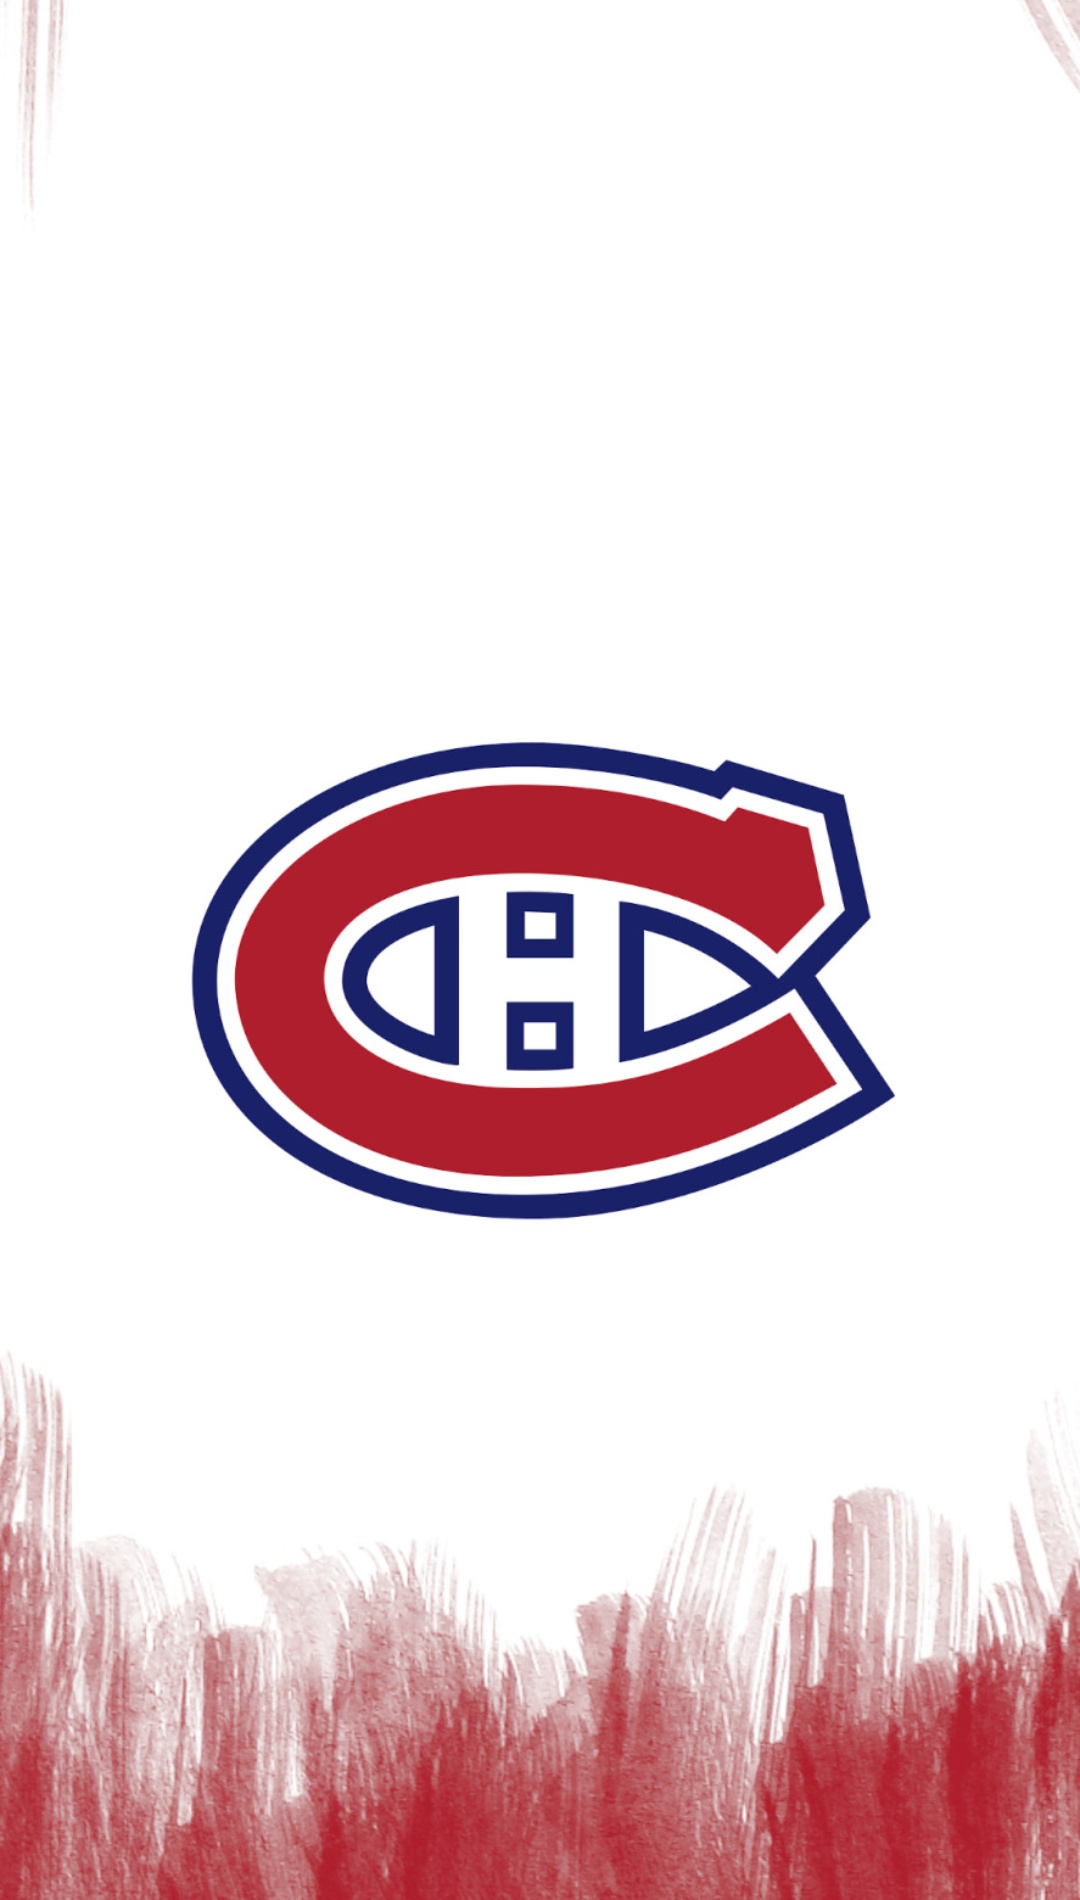 Montreal Canadiens Images